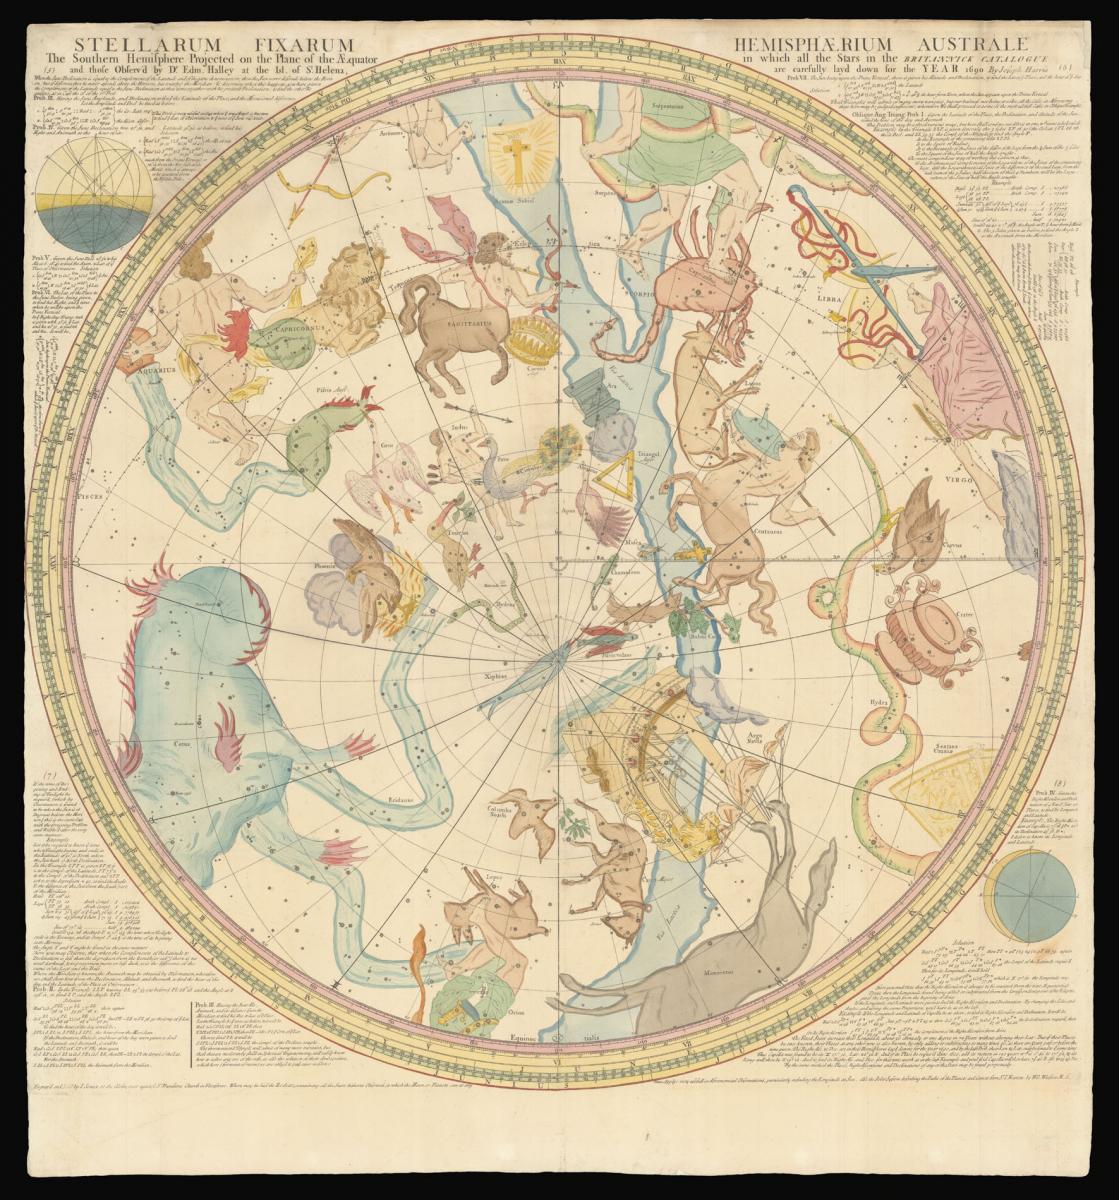 The most up to date rendering of the Heavens at the beginning of the eighteenth century